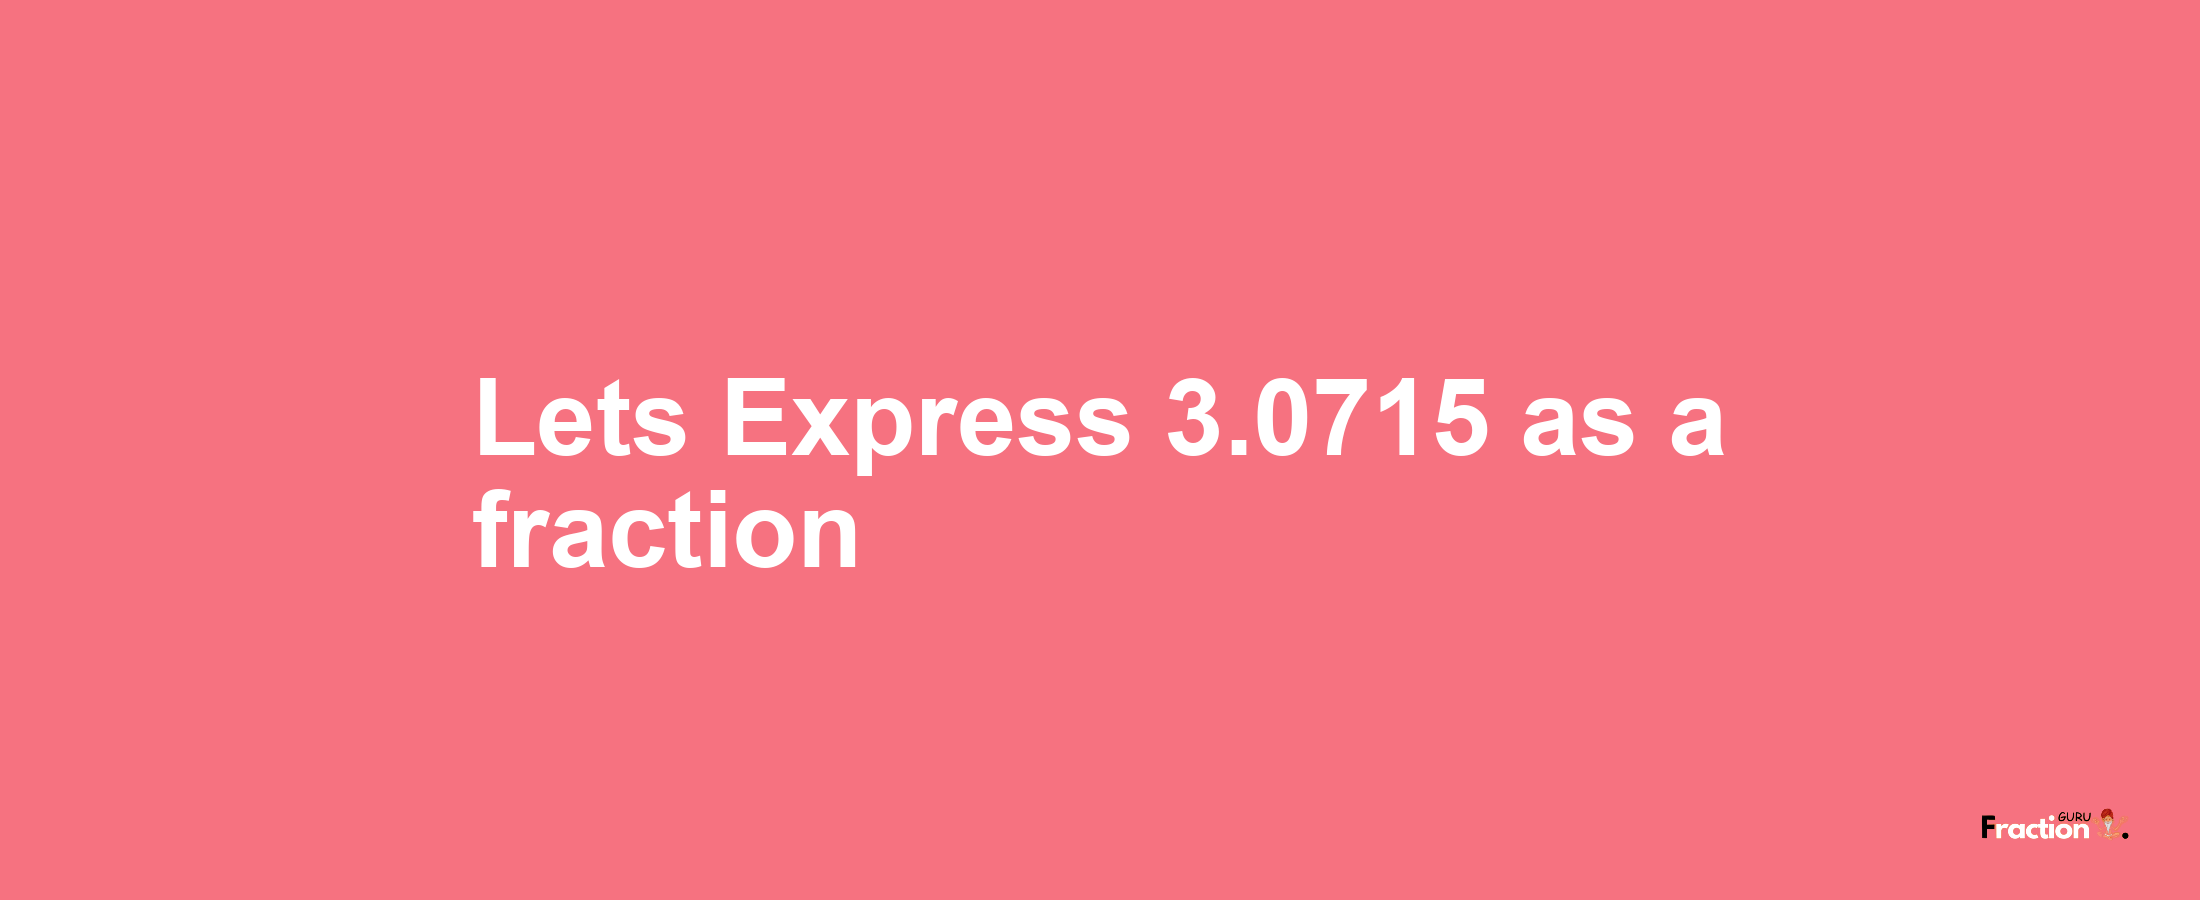 Lets Express 3.0715 as afraction